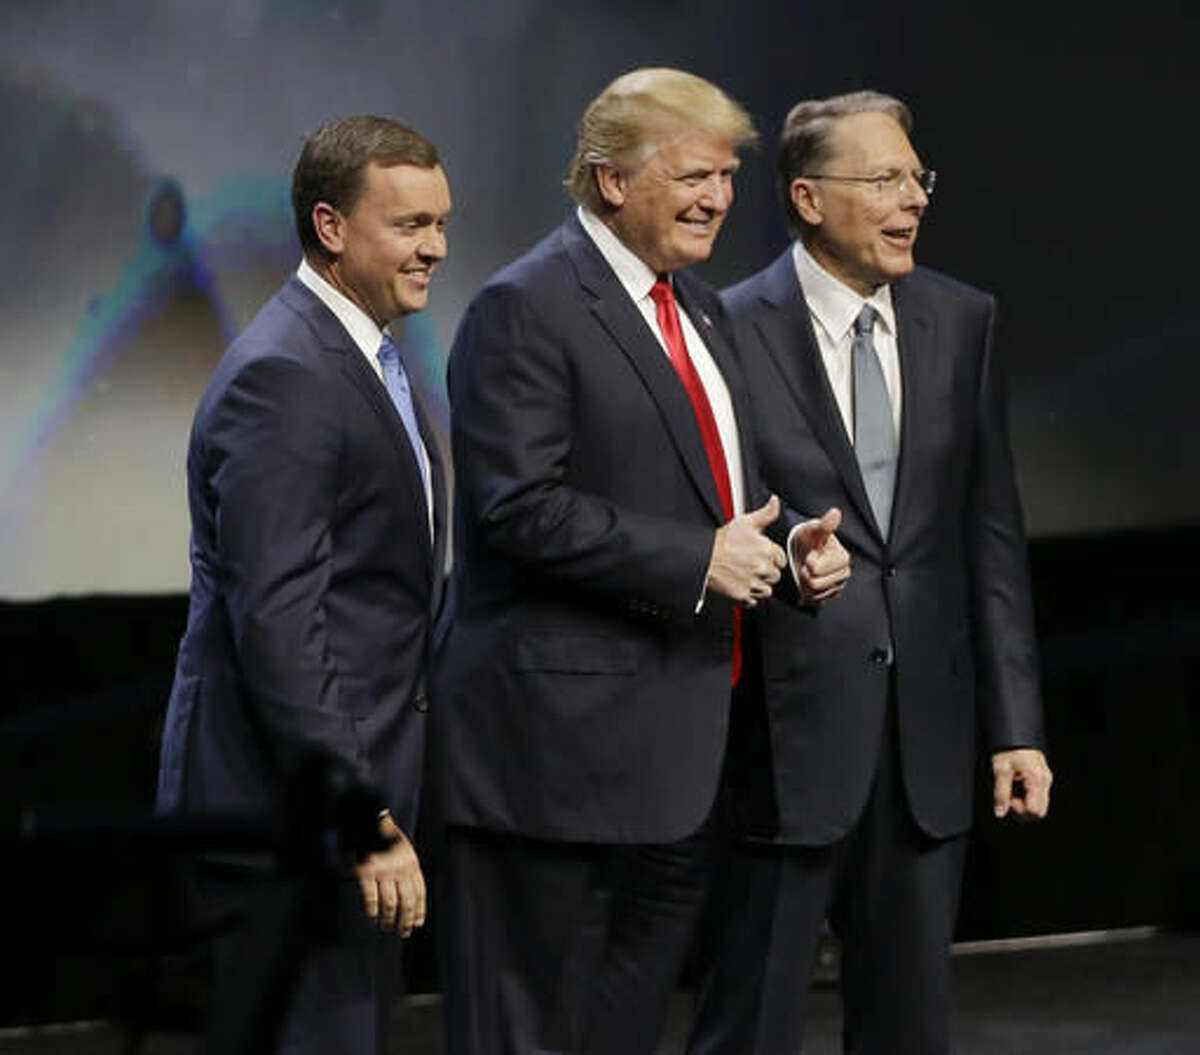 FILE - In this May 20, 2016, file photo, then-Republican presidential candidate Donald Trump is introduced by National Rifle Association executive director Chris W. Cox , left, and NRA executive vice president Wayne LaPierre as he takes the stage to speak at the NRA convention in Louisville, Ky. Firearms enthusiasts who embraced Donald Trump’s presidential campaign and his full-throated support of the Second Amendment are expecting a sweeping expansion of gun rights under his administration and a Congress firmly controlled by Republicans. (AP Photo/Mark Humphrey, File)